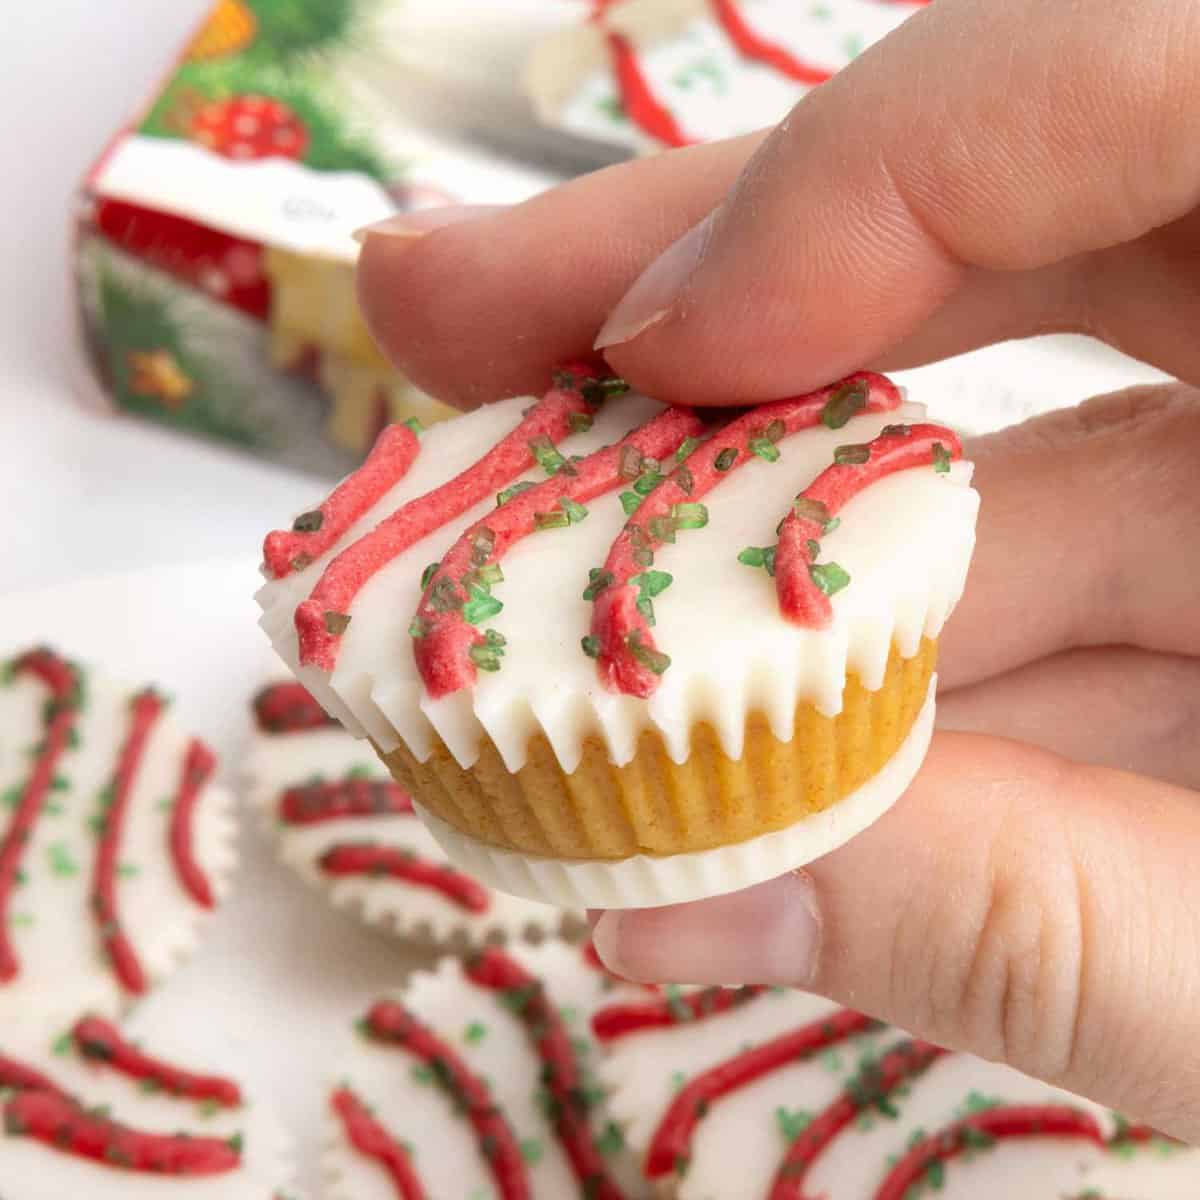 Cake ball in a mini muffin tin that does not require dipping. Decorated as Little Debbie Christmas tree cake